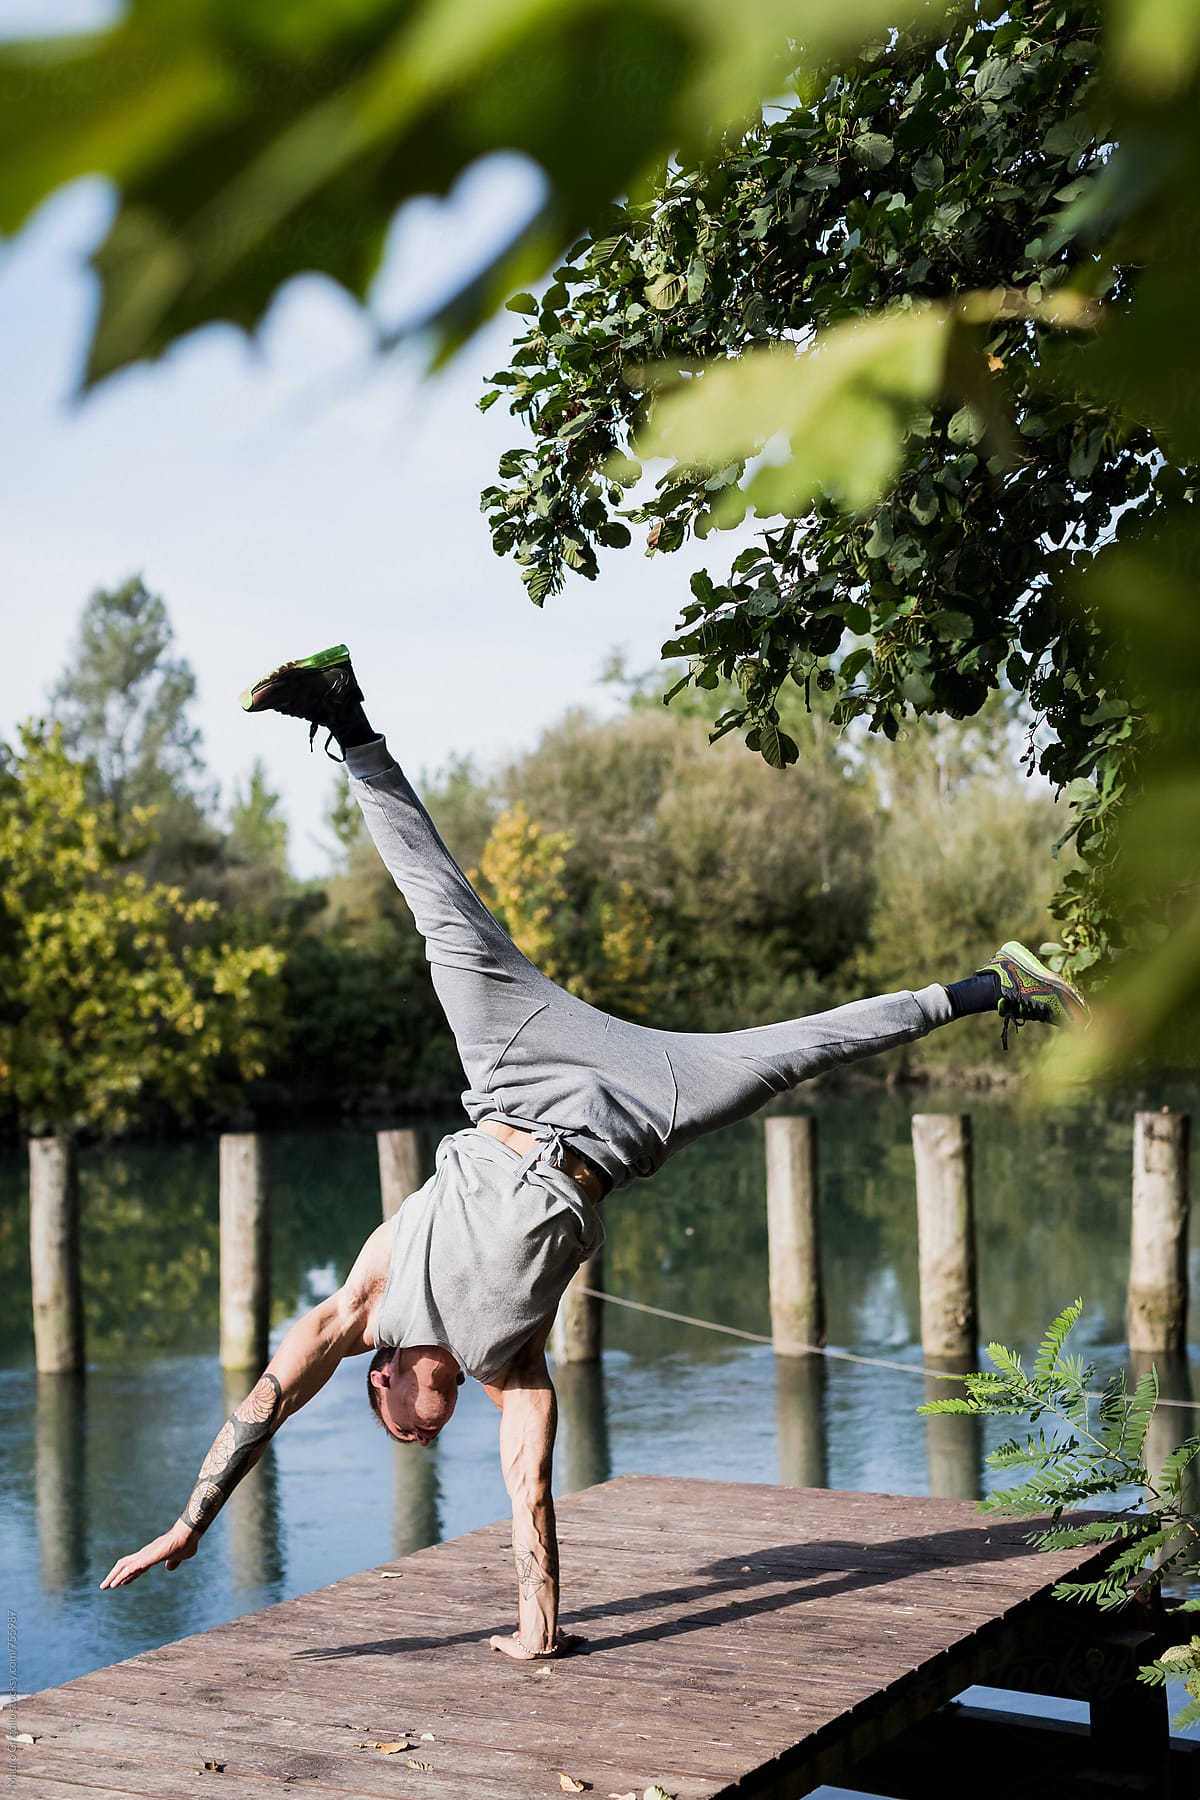 Man doing Handstand in nature